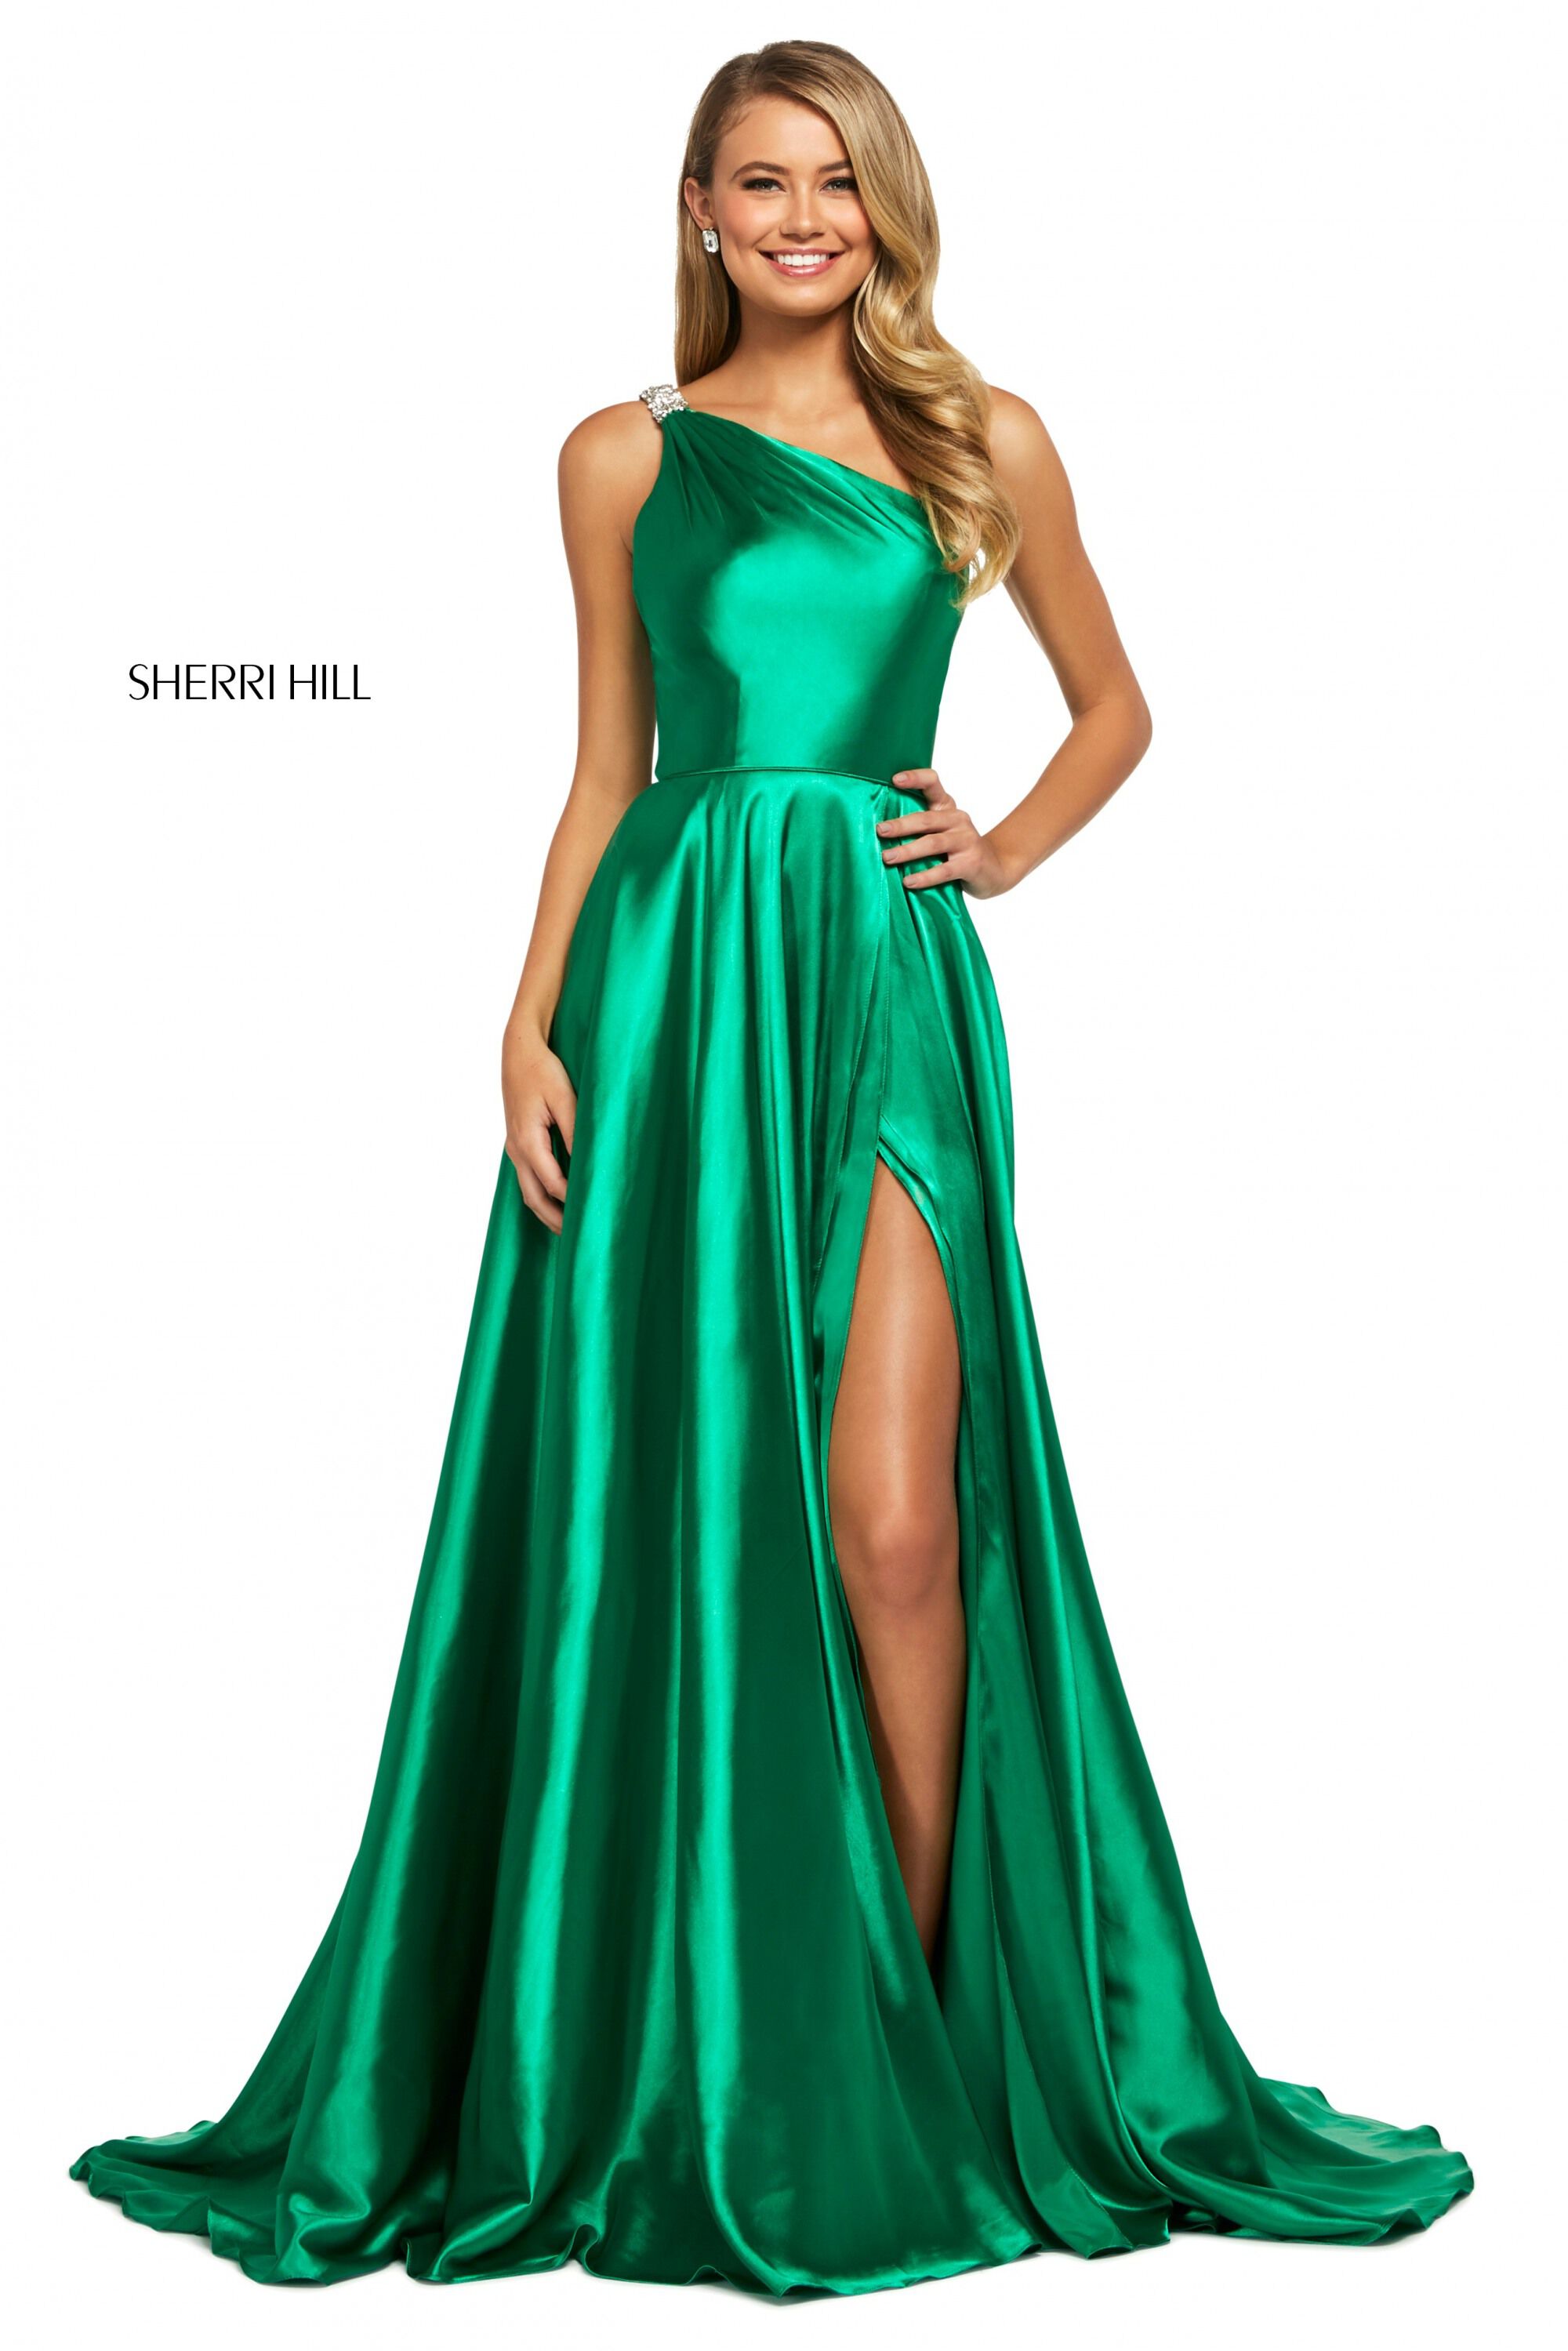 style № 53295 designed by SherriHill